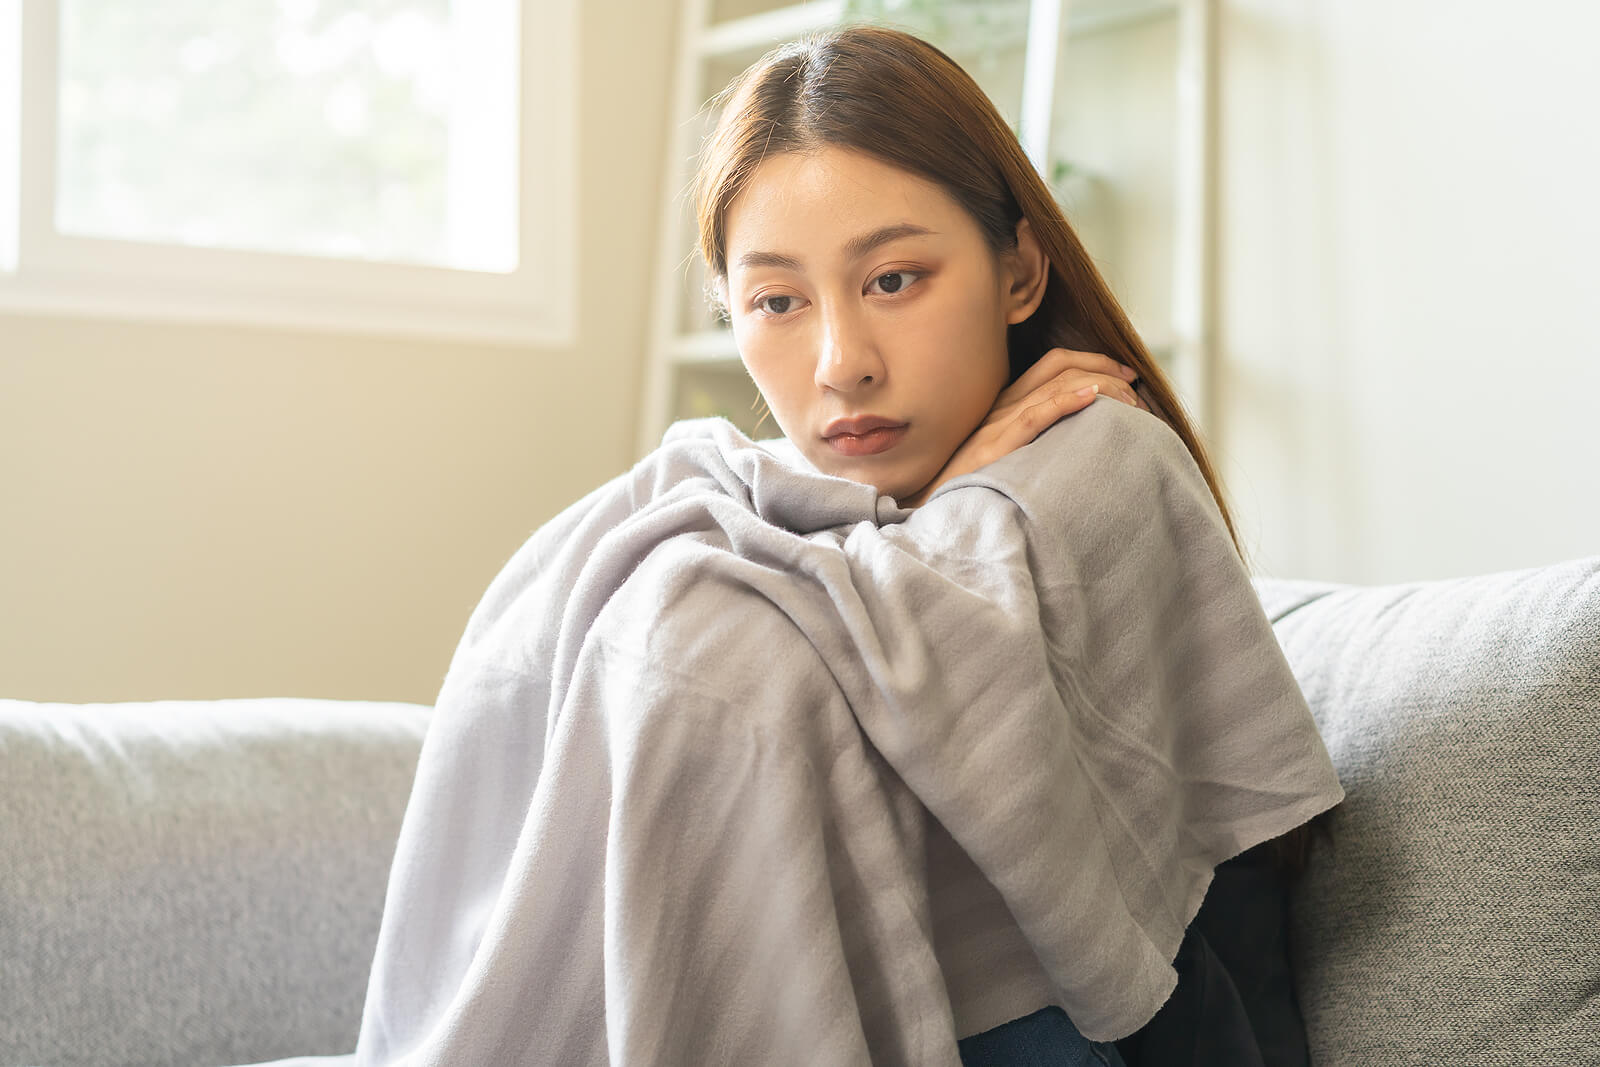 A young woman sits wrapped in a blanket while she struggles to overcome the loss of a loved one to suicide. Get the support you need to find peace after suicide with PTSD Treatment in Ohio.